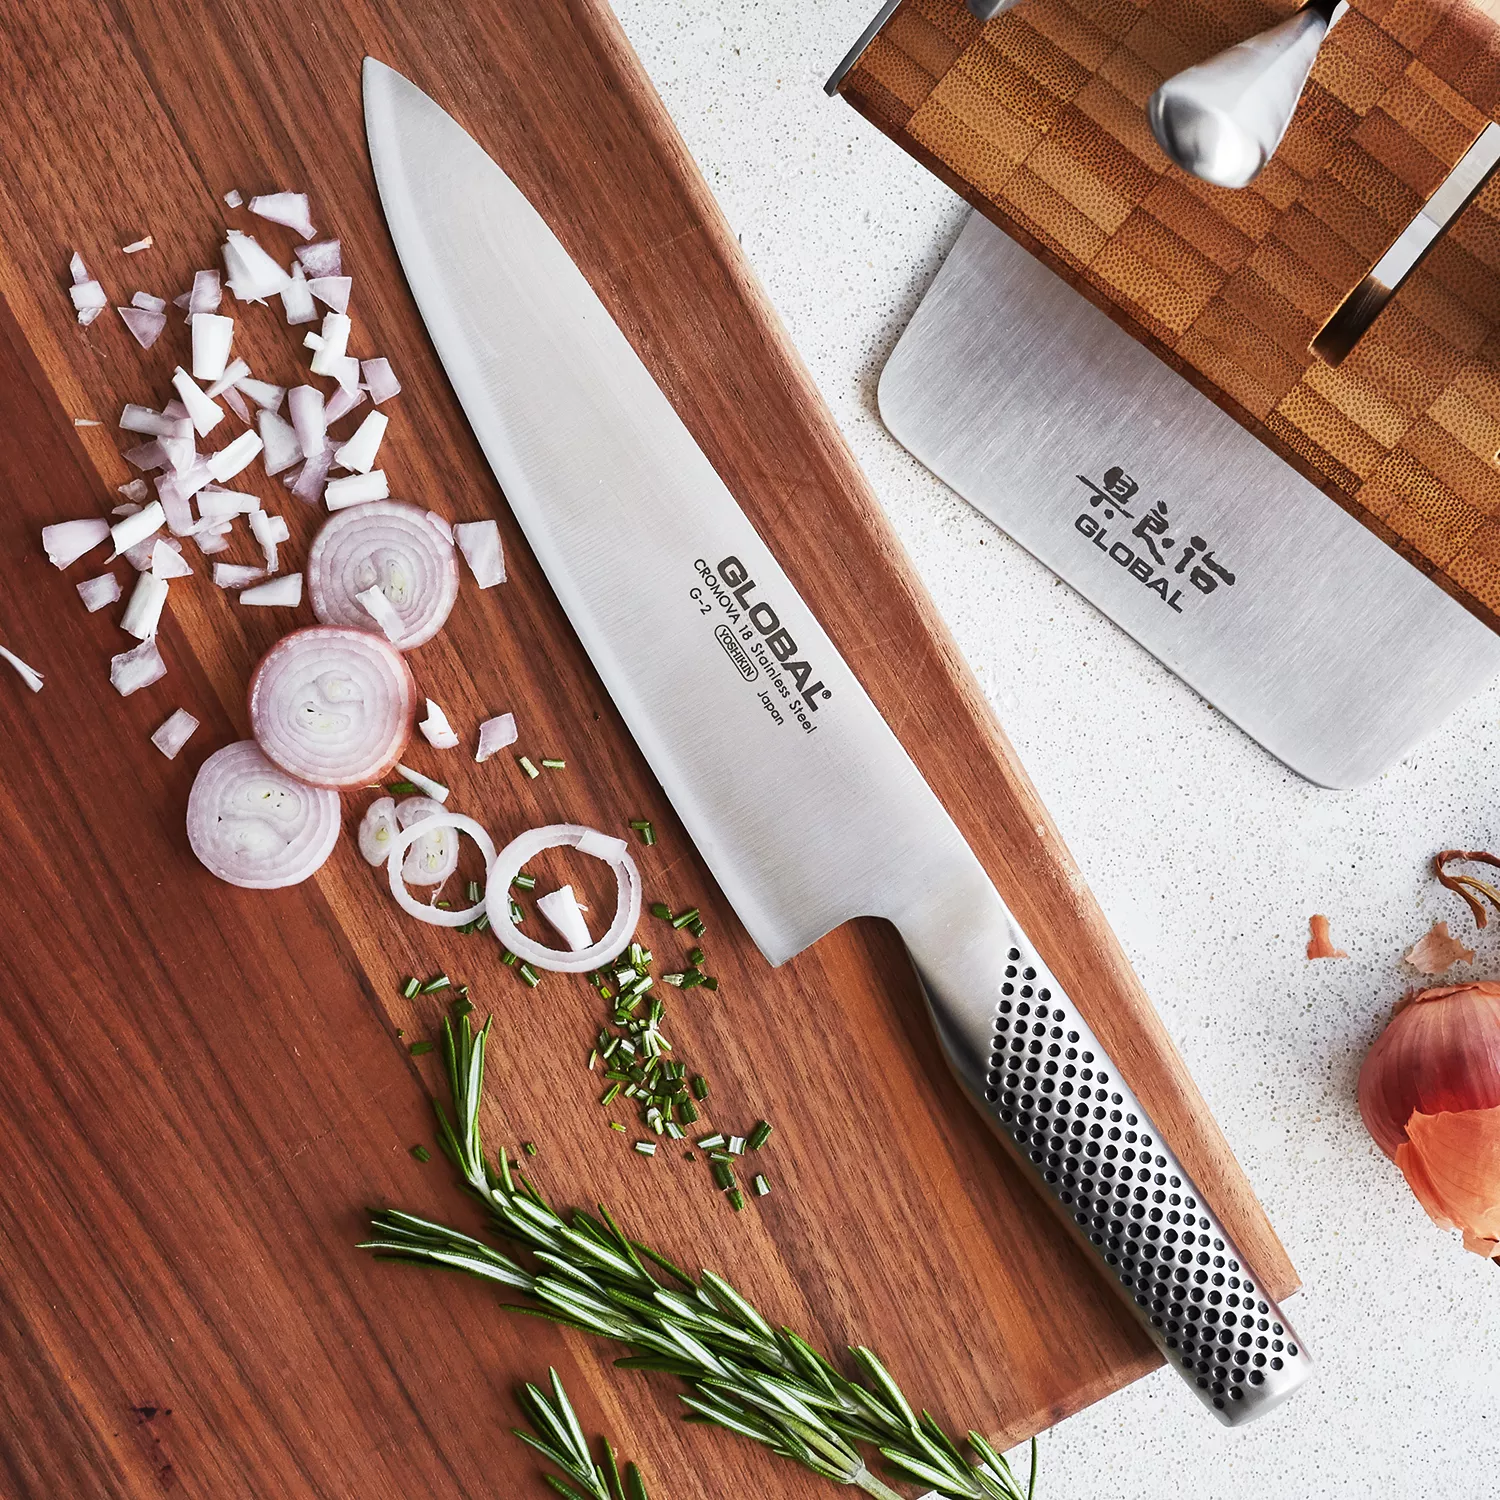 Buy 8 SAI Japanese Chef's Carving Knife, Order 8' SAI Asian Chef's Knife  at Global Cutlery